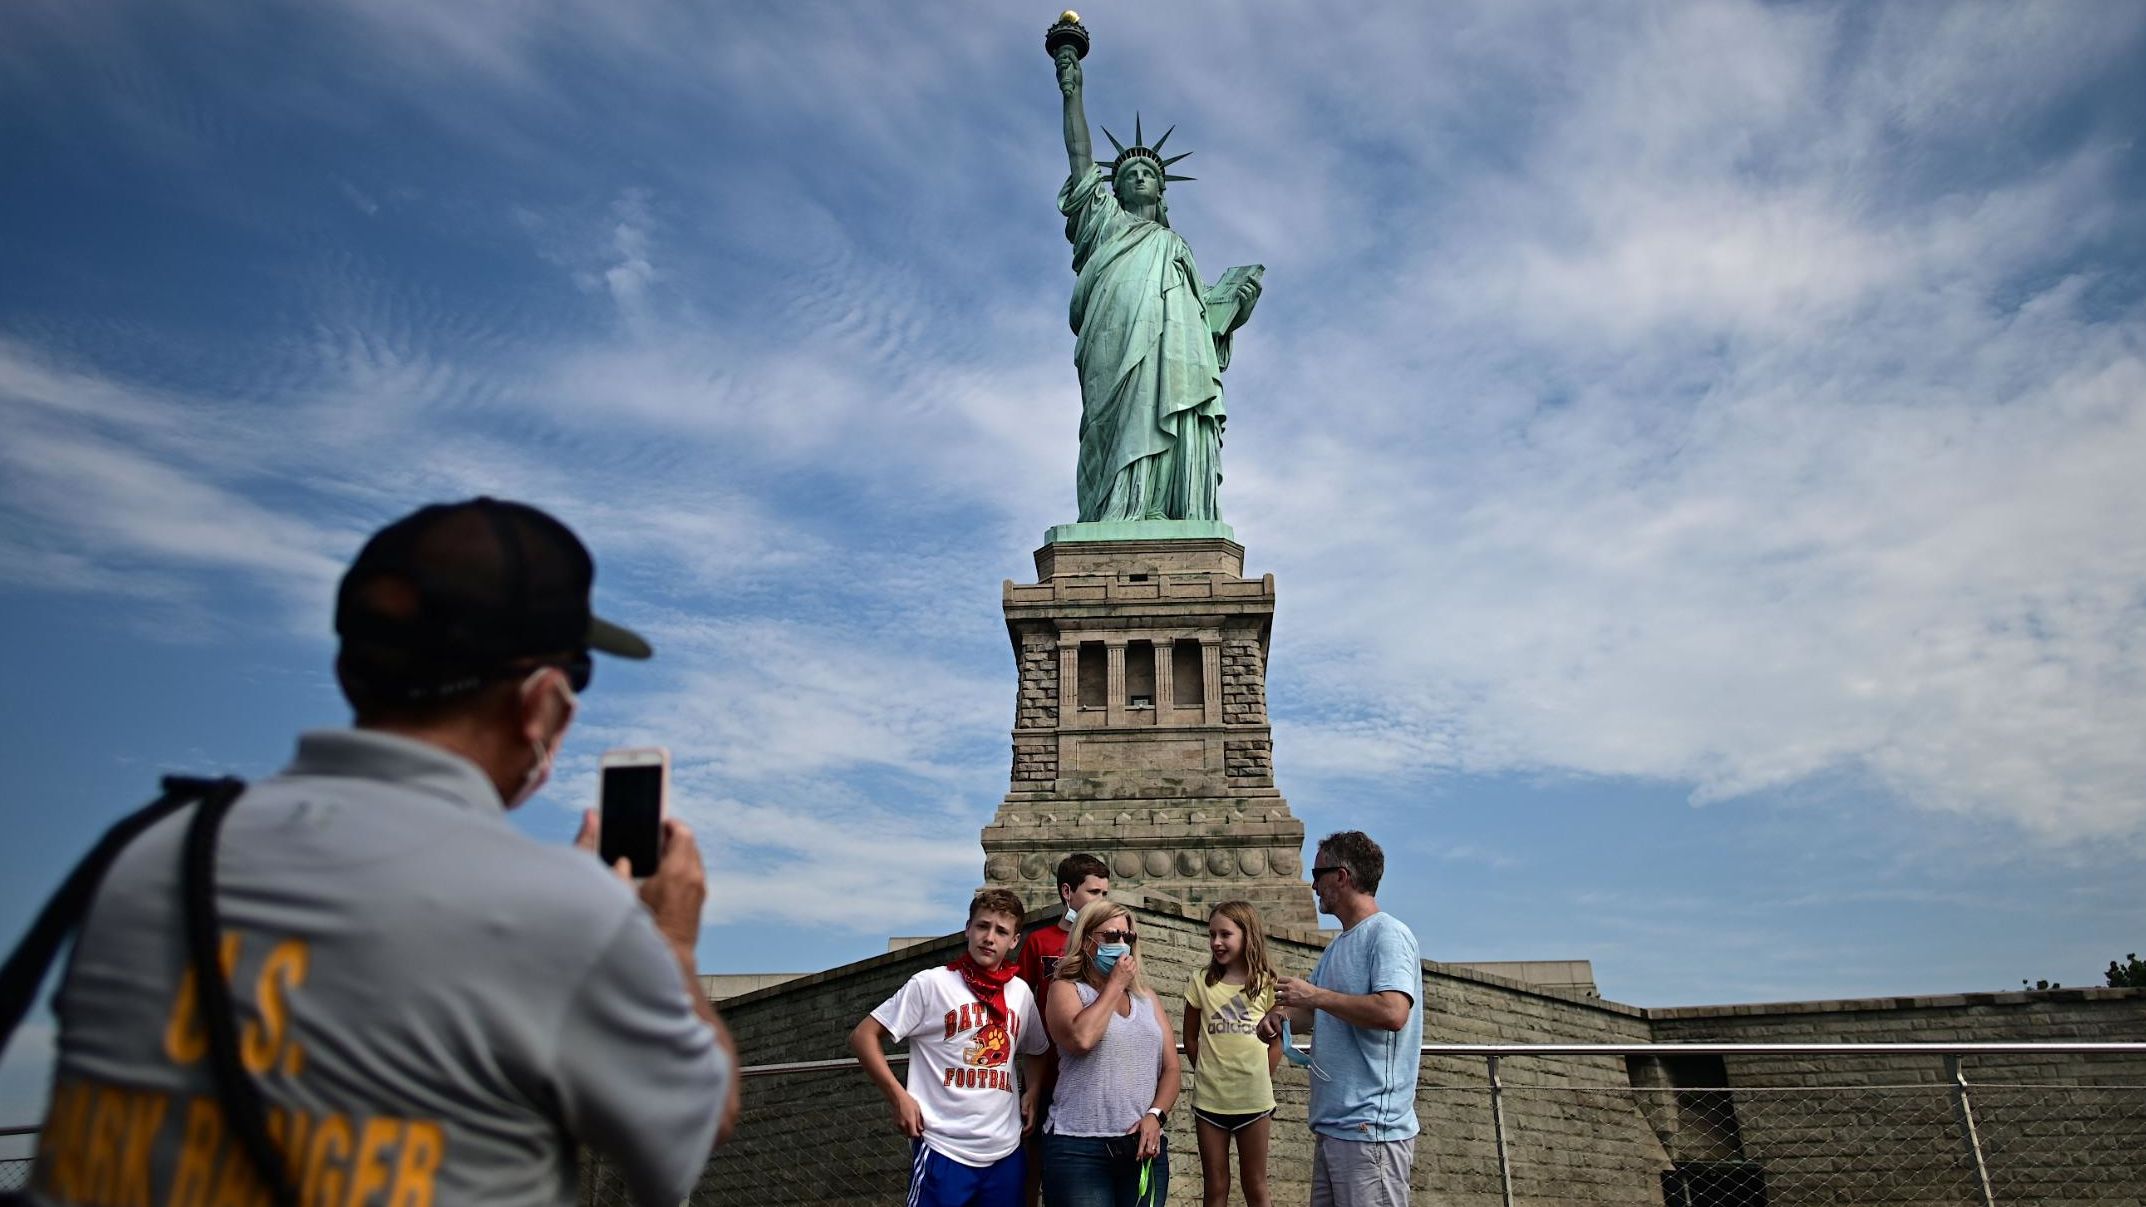 A park ranger takes a picture of tourists in front of the Statue of Liberty after Liberty Island partially reopened in New York on July 20.